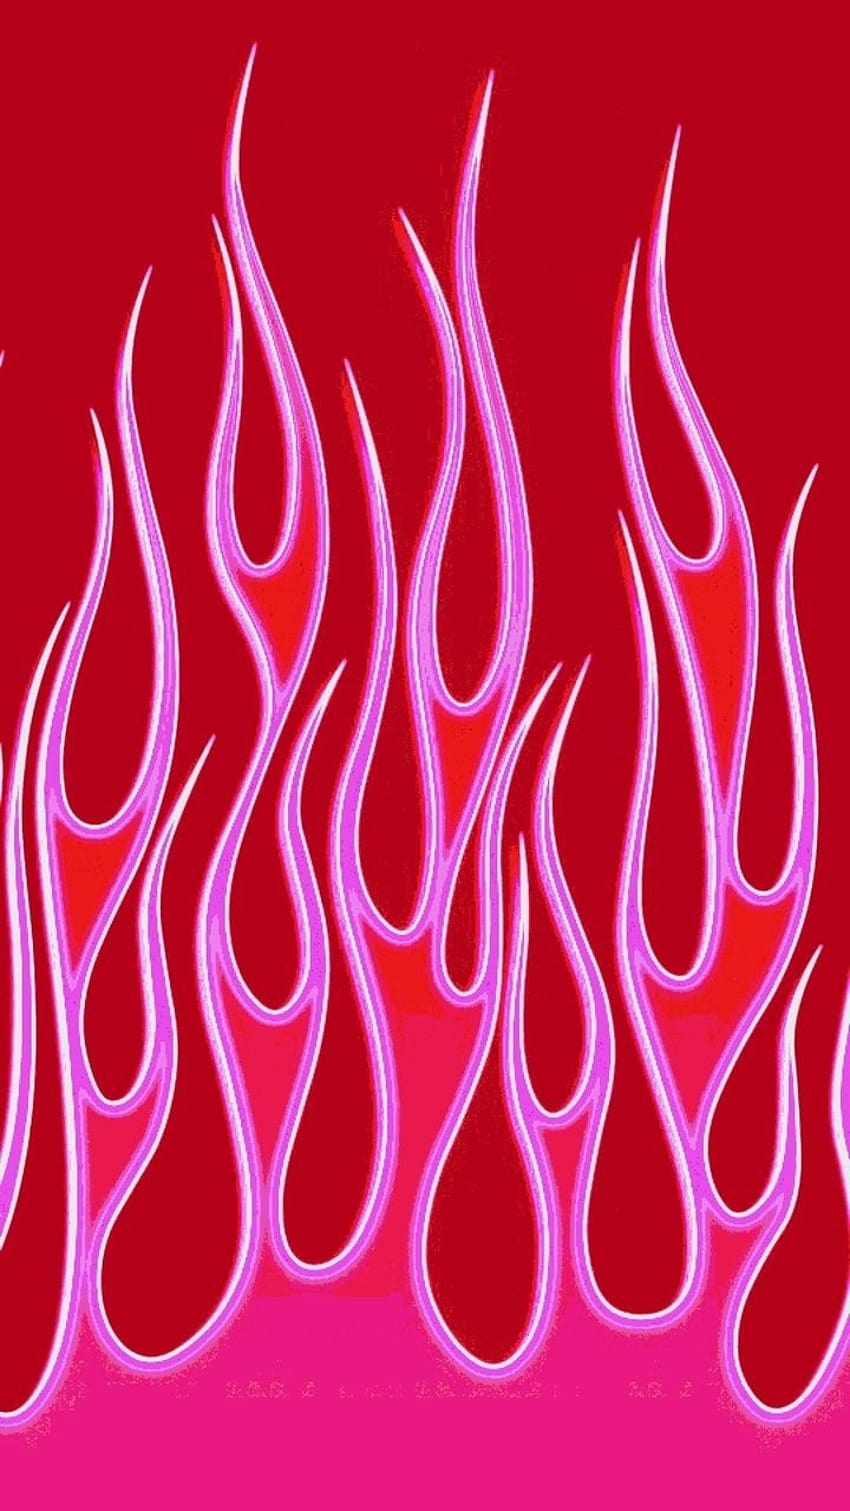 Red and pink neon flames on a red background - Fire